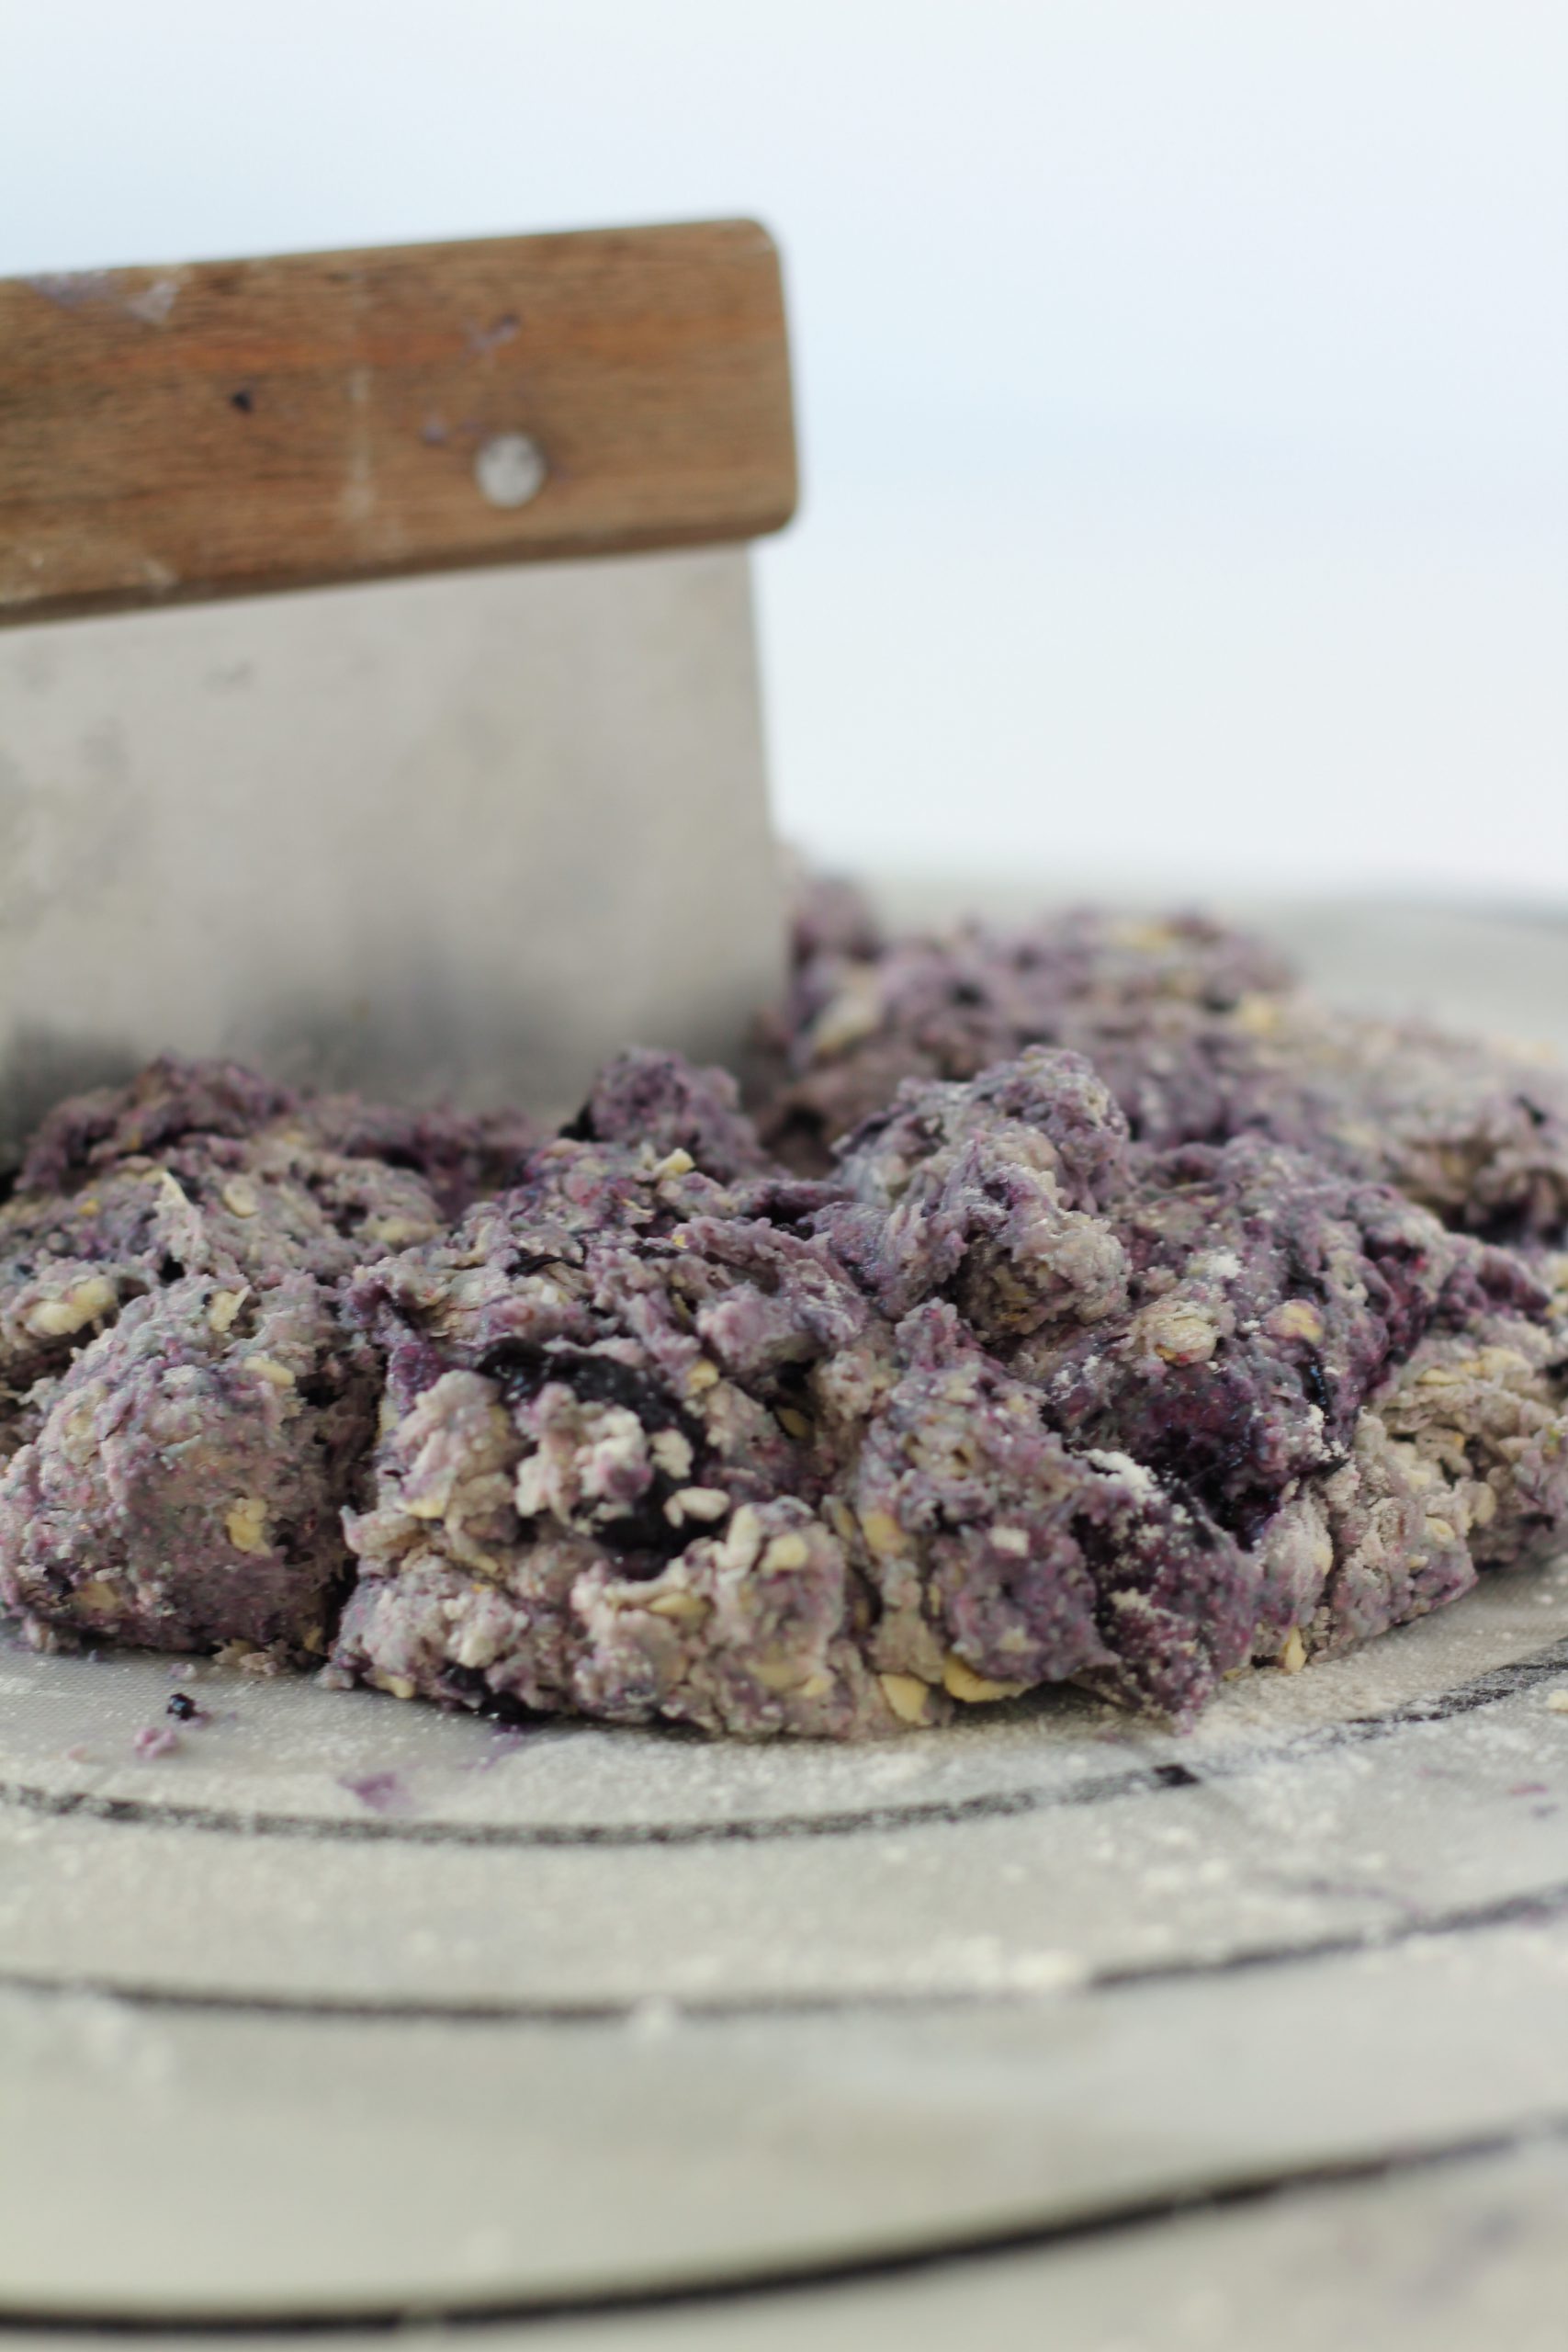 Cutting of the blueberry scone dough